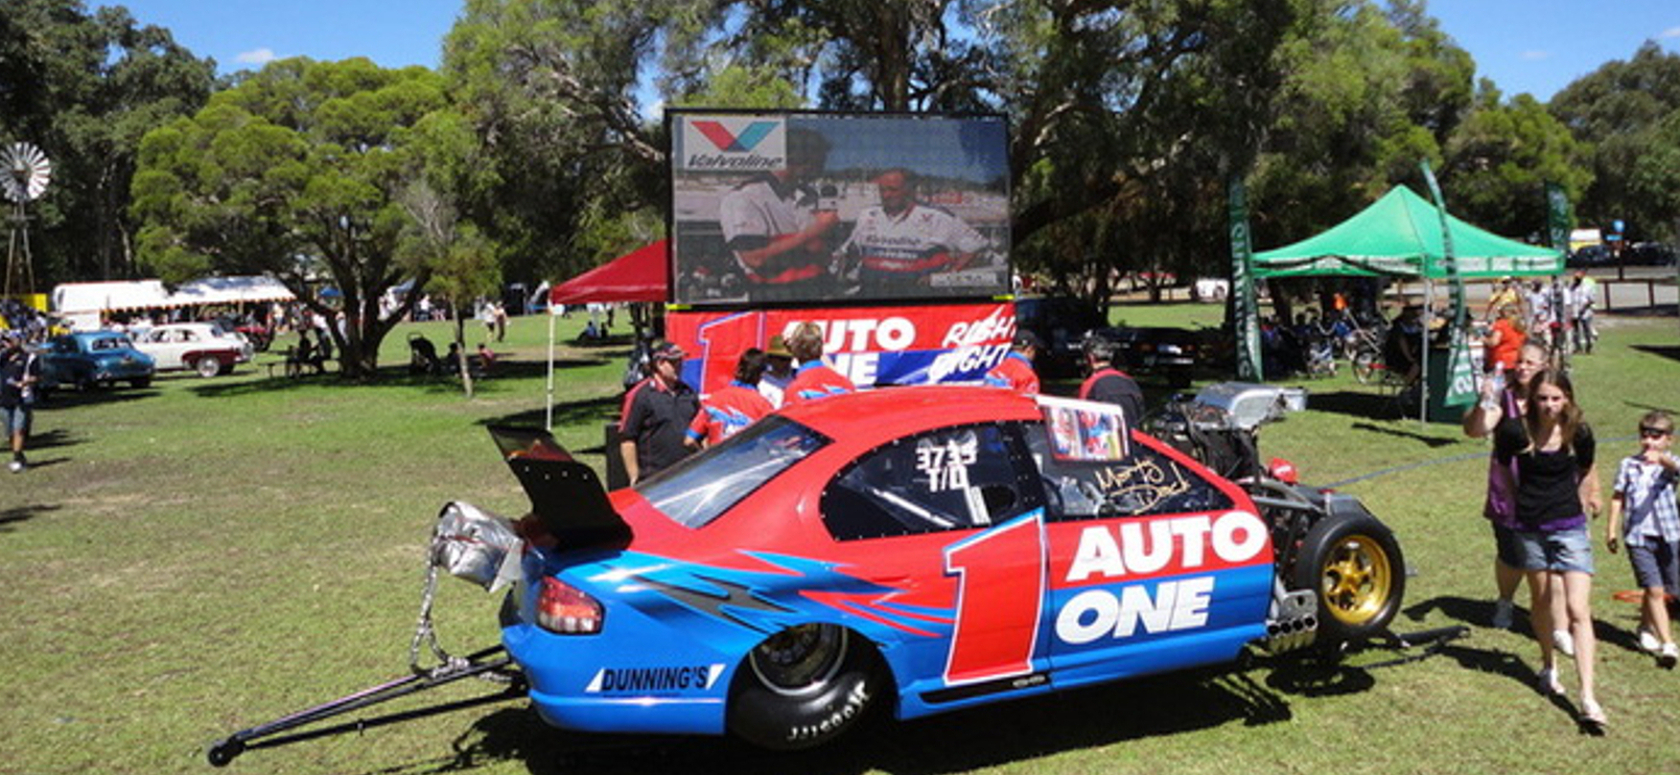 Mega Screen with Auto One Show racecar